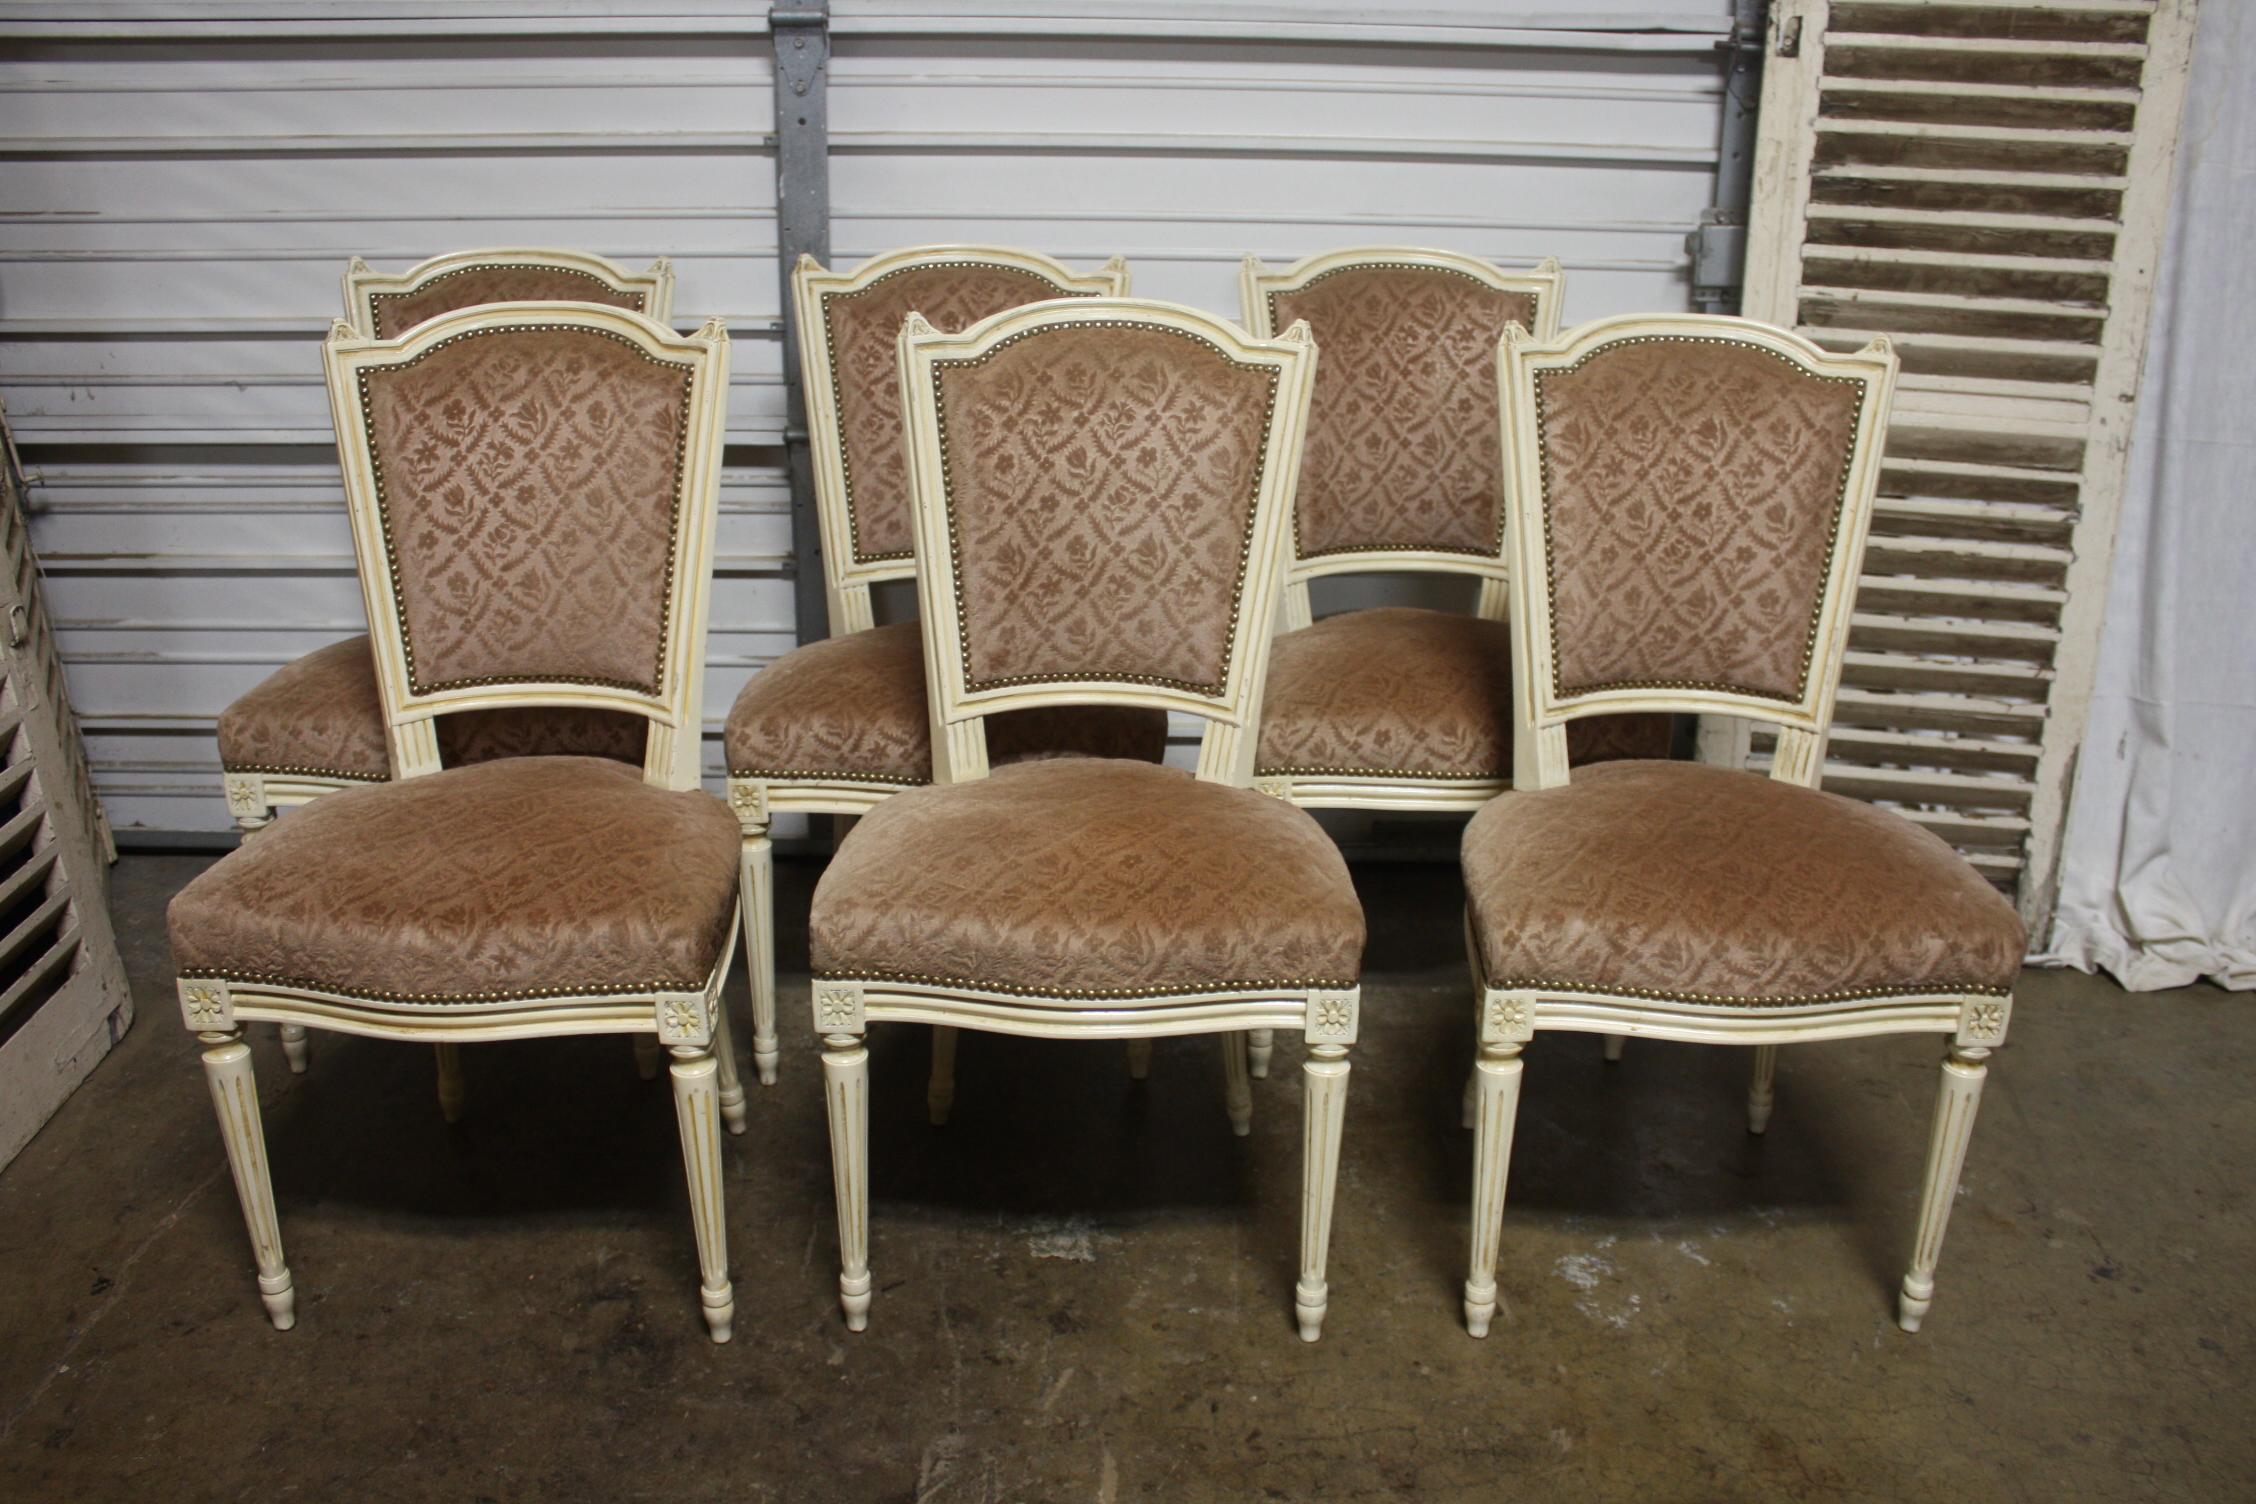 Very charming French dining room chairs with a nice design of the Louis XVI style. They are strong and sturdy.